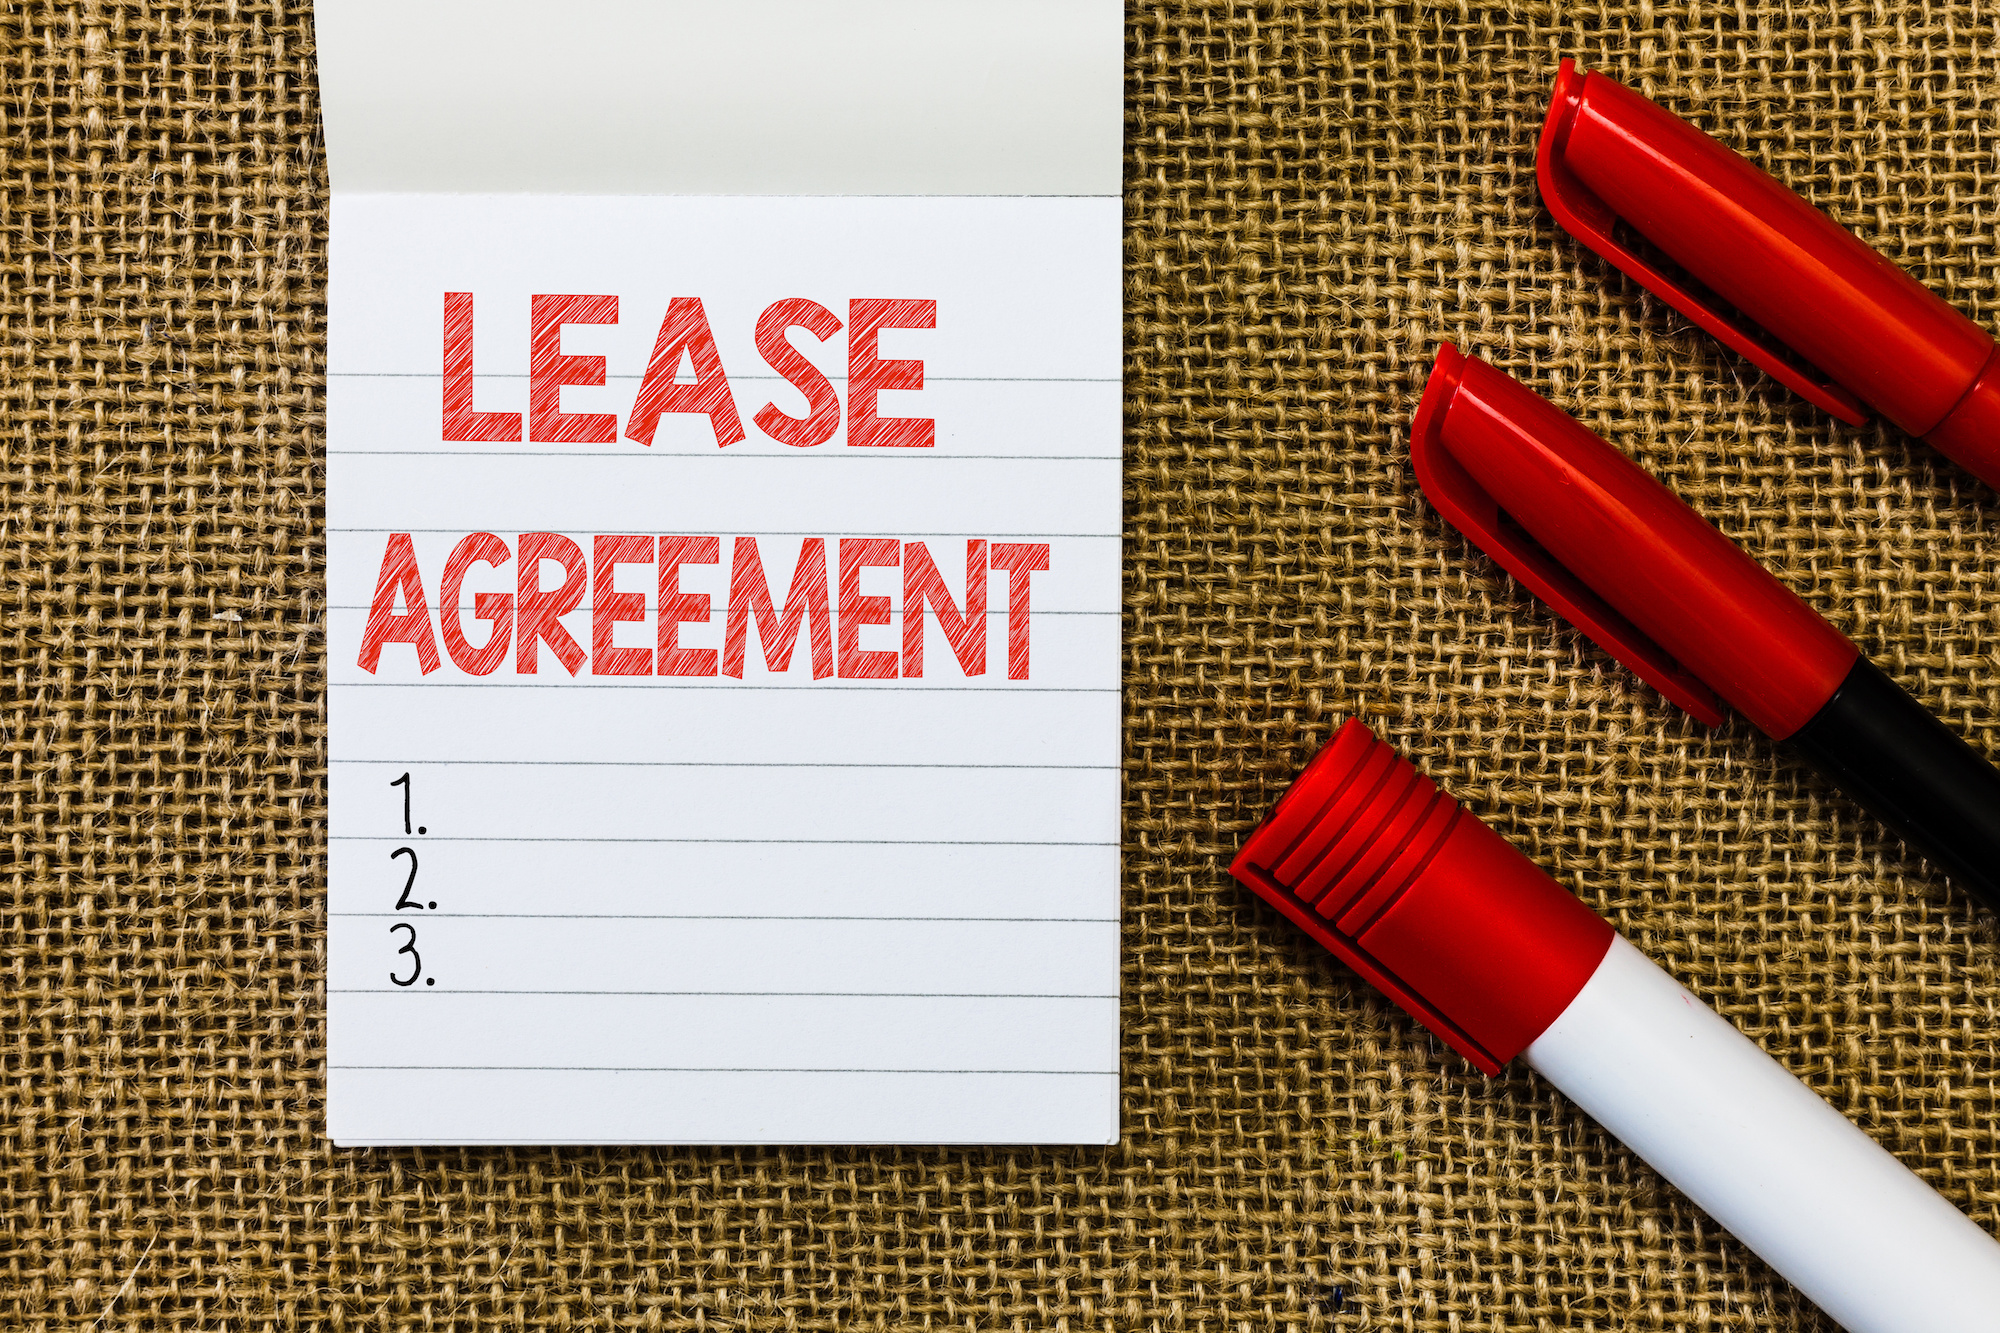 "Lease agreement" written on a notepad with three red markers.